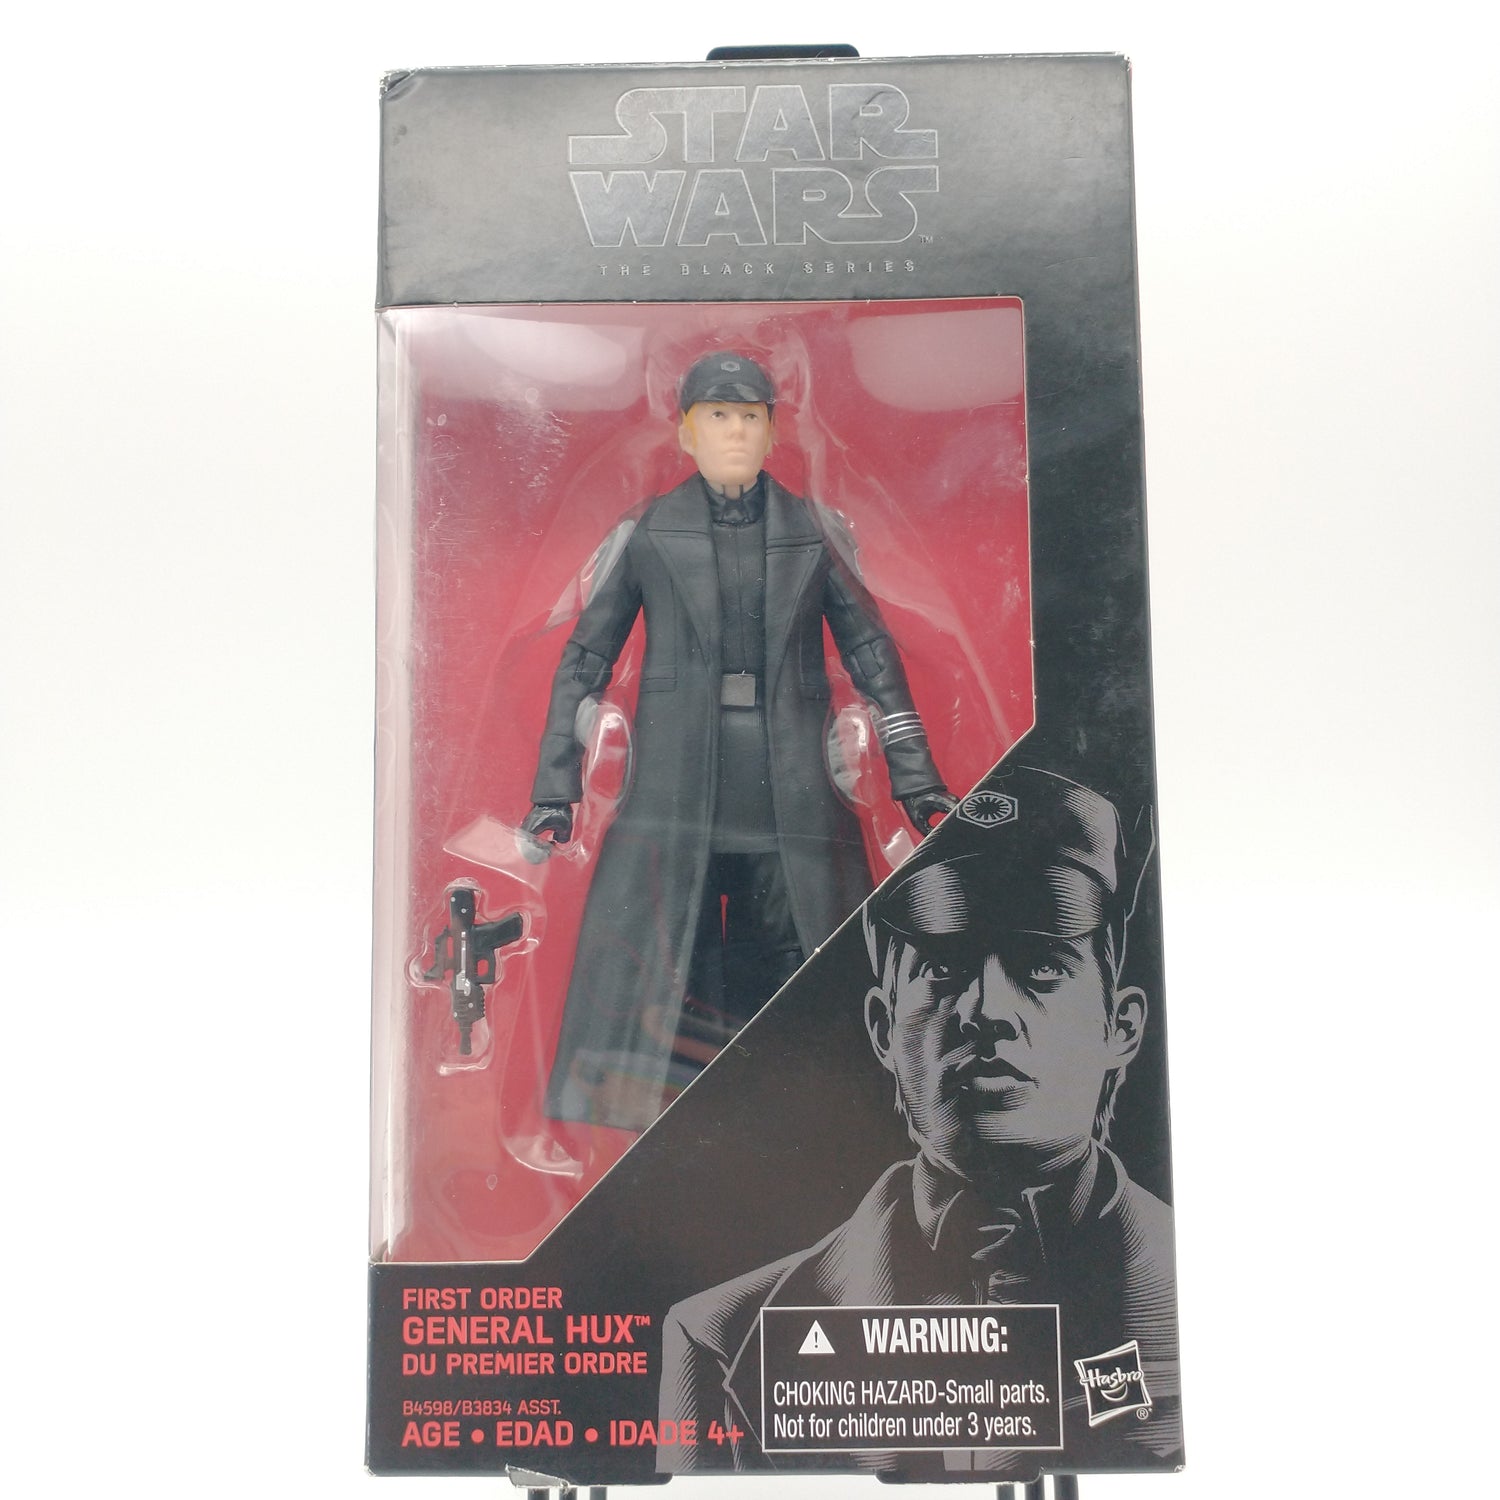 The front of the box and bubble are intact. The action figure is standing against a red background. He is wearing a military uniform with a black trenchcoat and a black hat. Next to him is a small black gun.